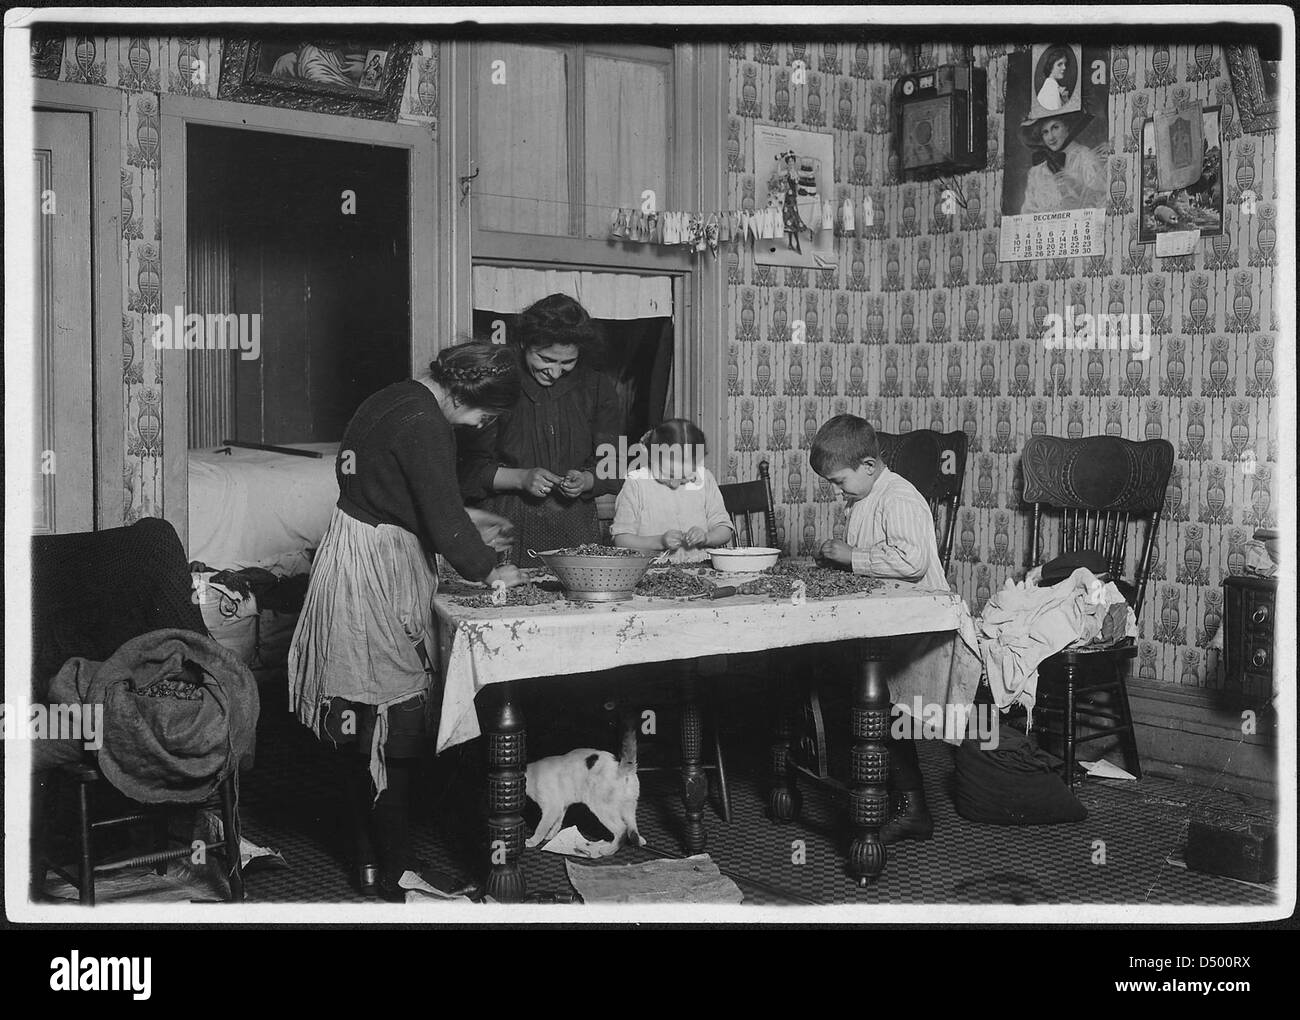 Mrs. Salvia, Joe, 10 years old, Josephine, 14 years, Camille, 7 years, picking nuts in a dirty tenement home, December 1911 Stock Photo